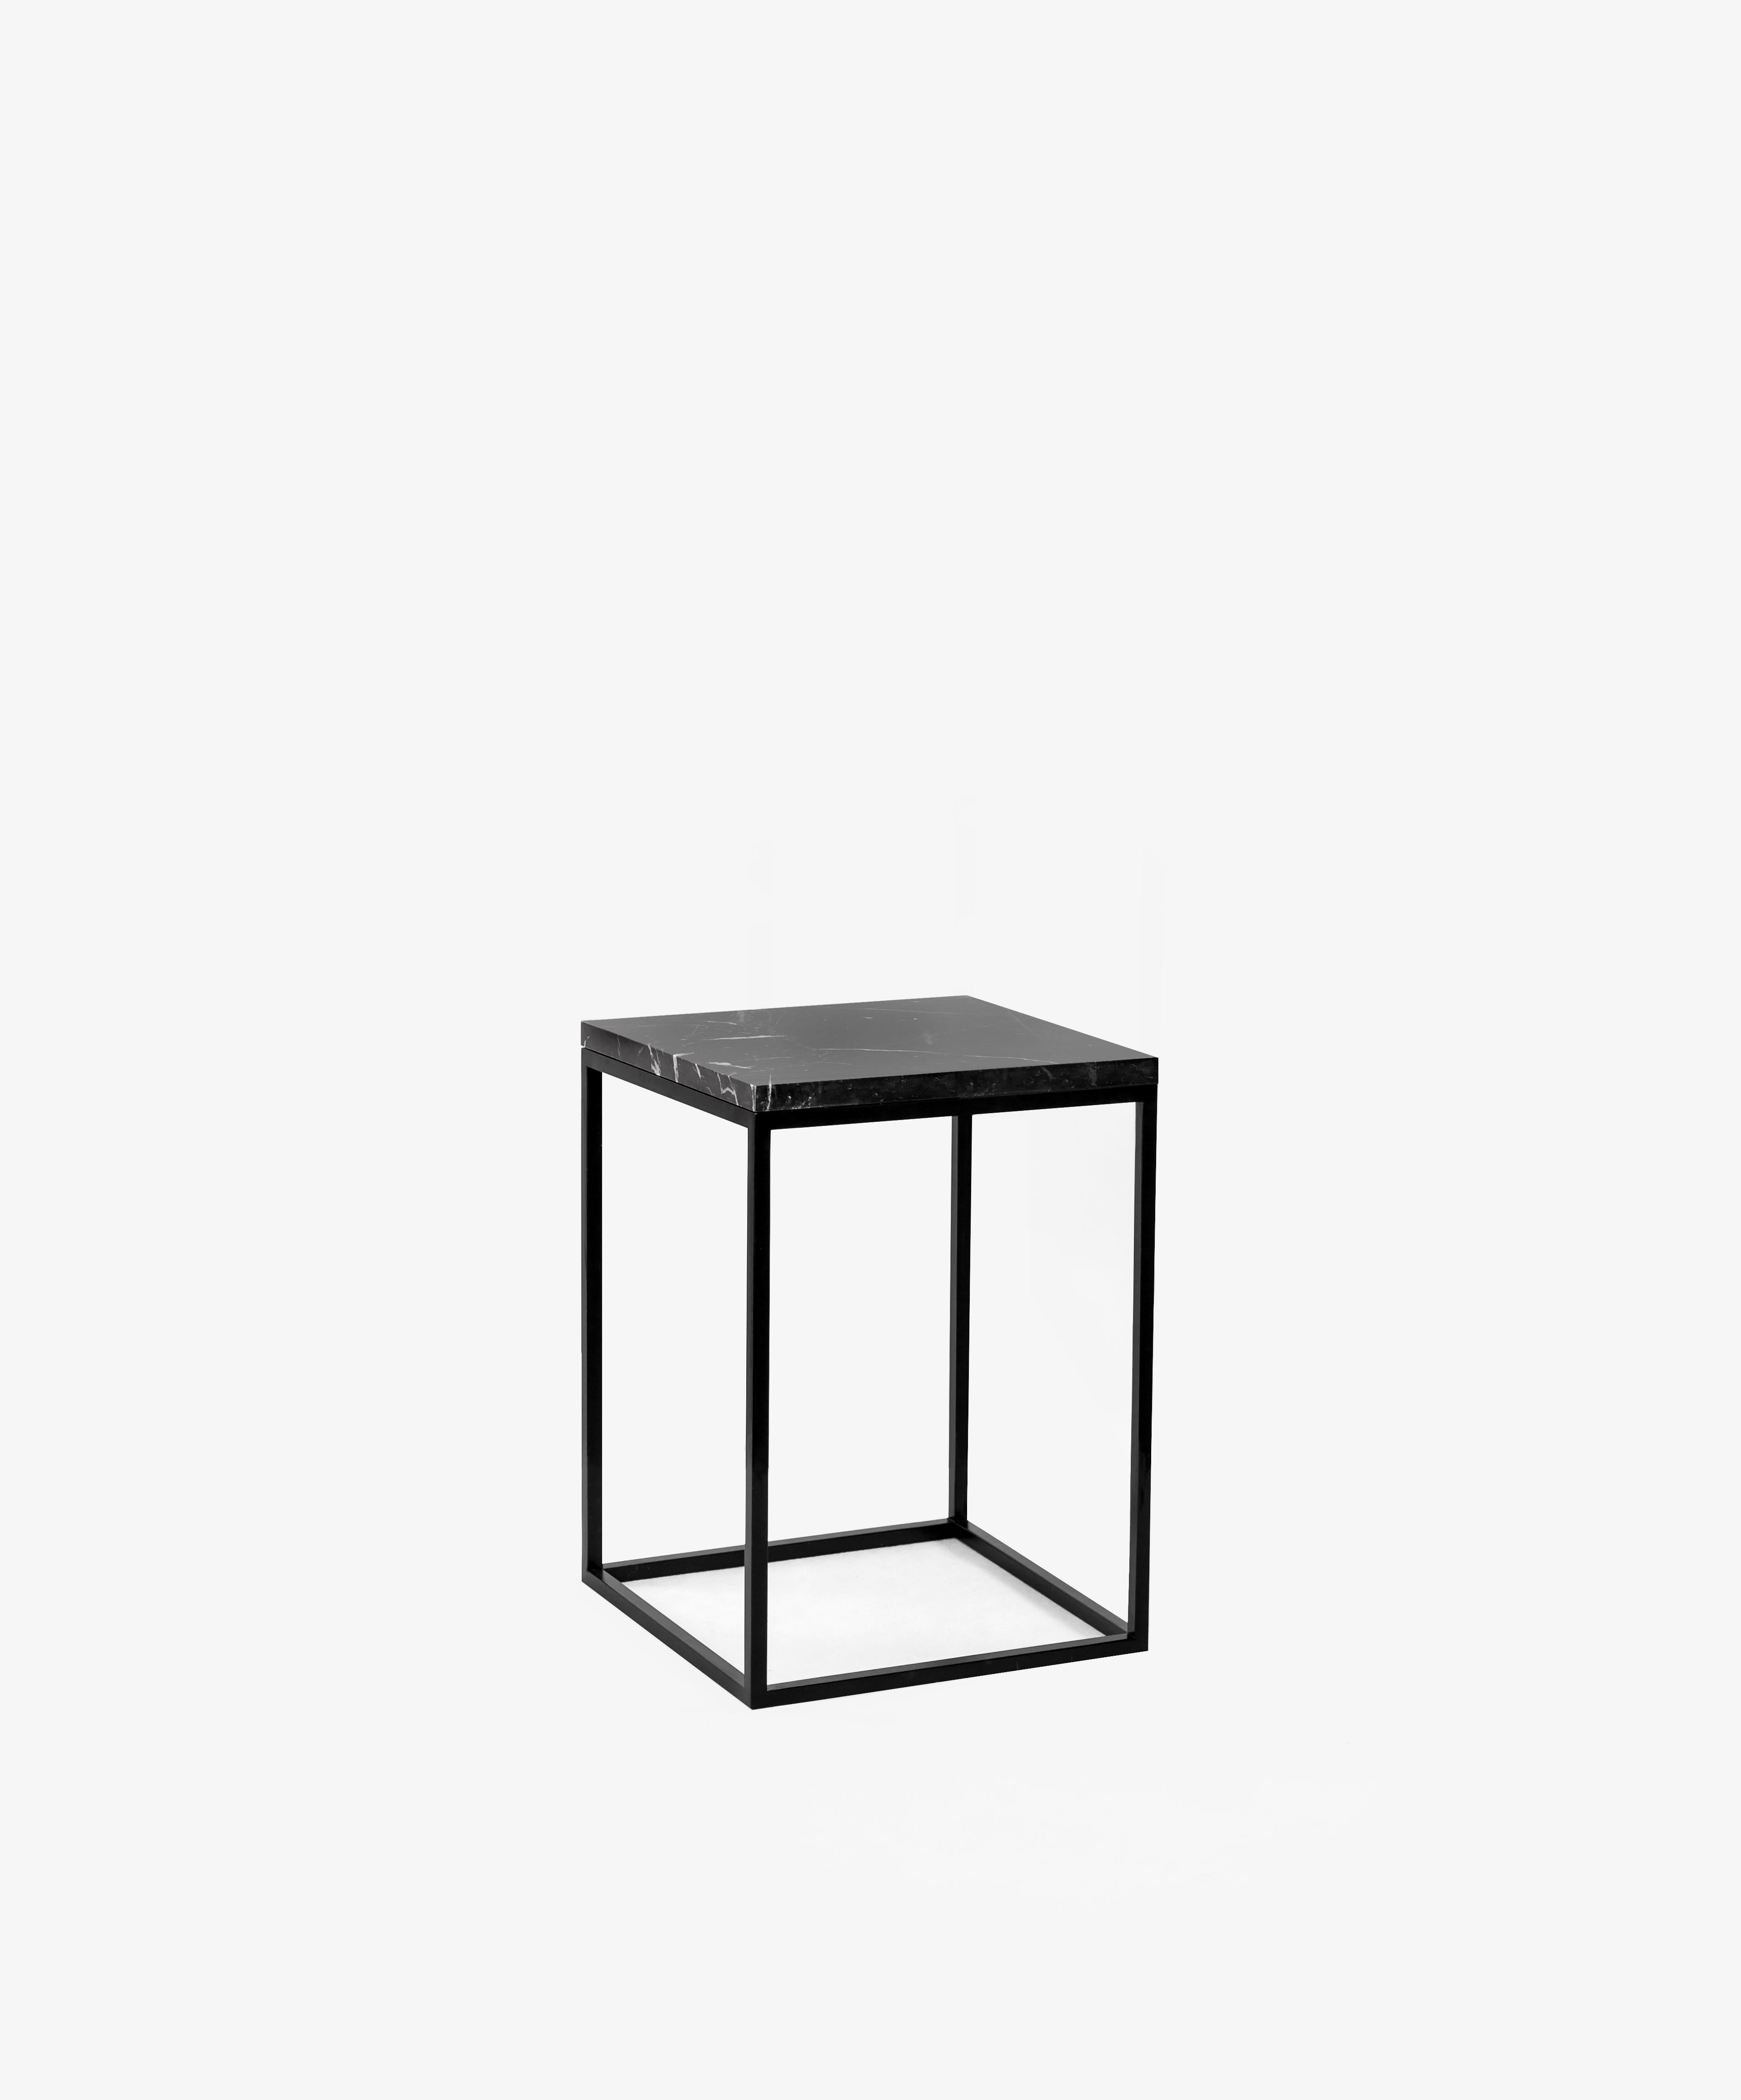 Set of 2 small pillar side table by Un’common.
Dimensions: W 30 x D 30 x H 42 cm.
Materials: White Carrara marble, Nero Marquina marble, steel.
Available in 3 sizes: H 42, H 72, H 90 cm.

White and Black Pillar is a piece of accessory